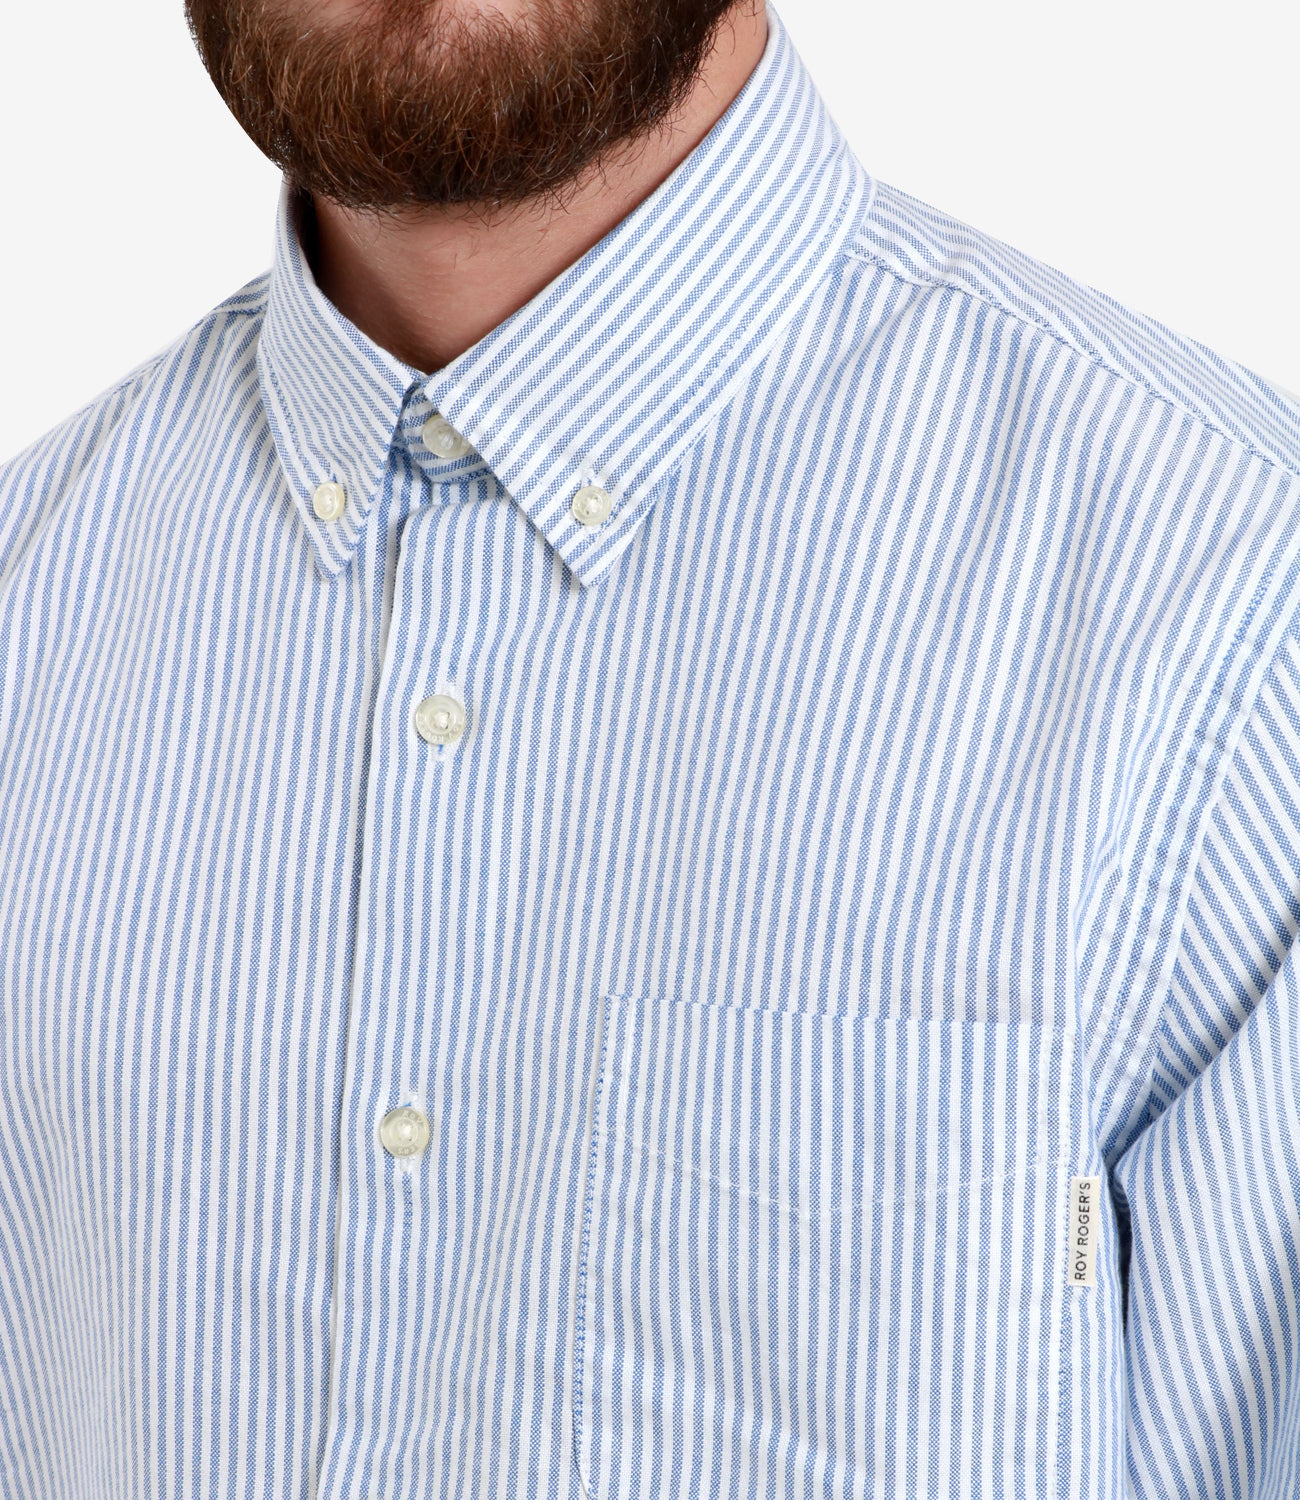 Roy Roger's | Blue and White Shirt